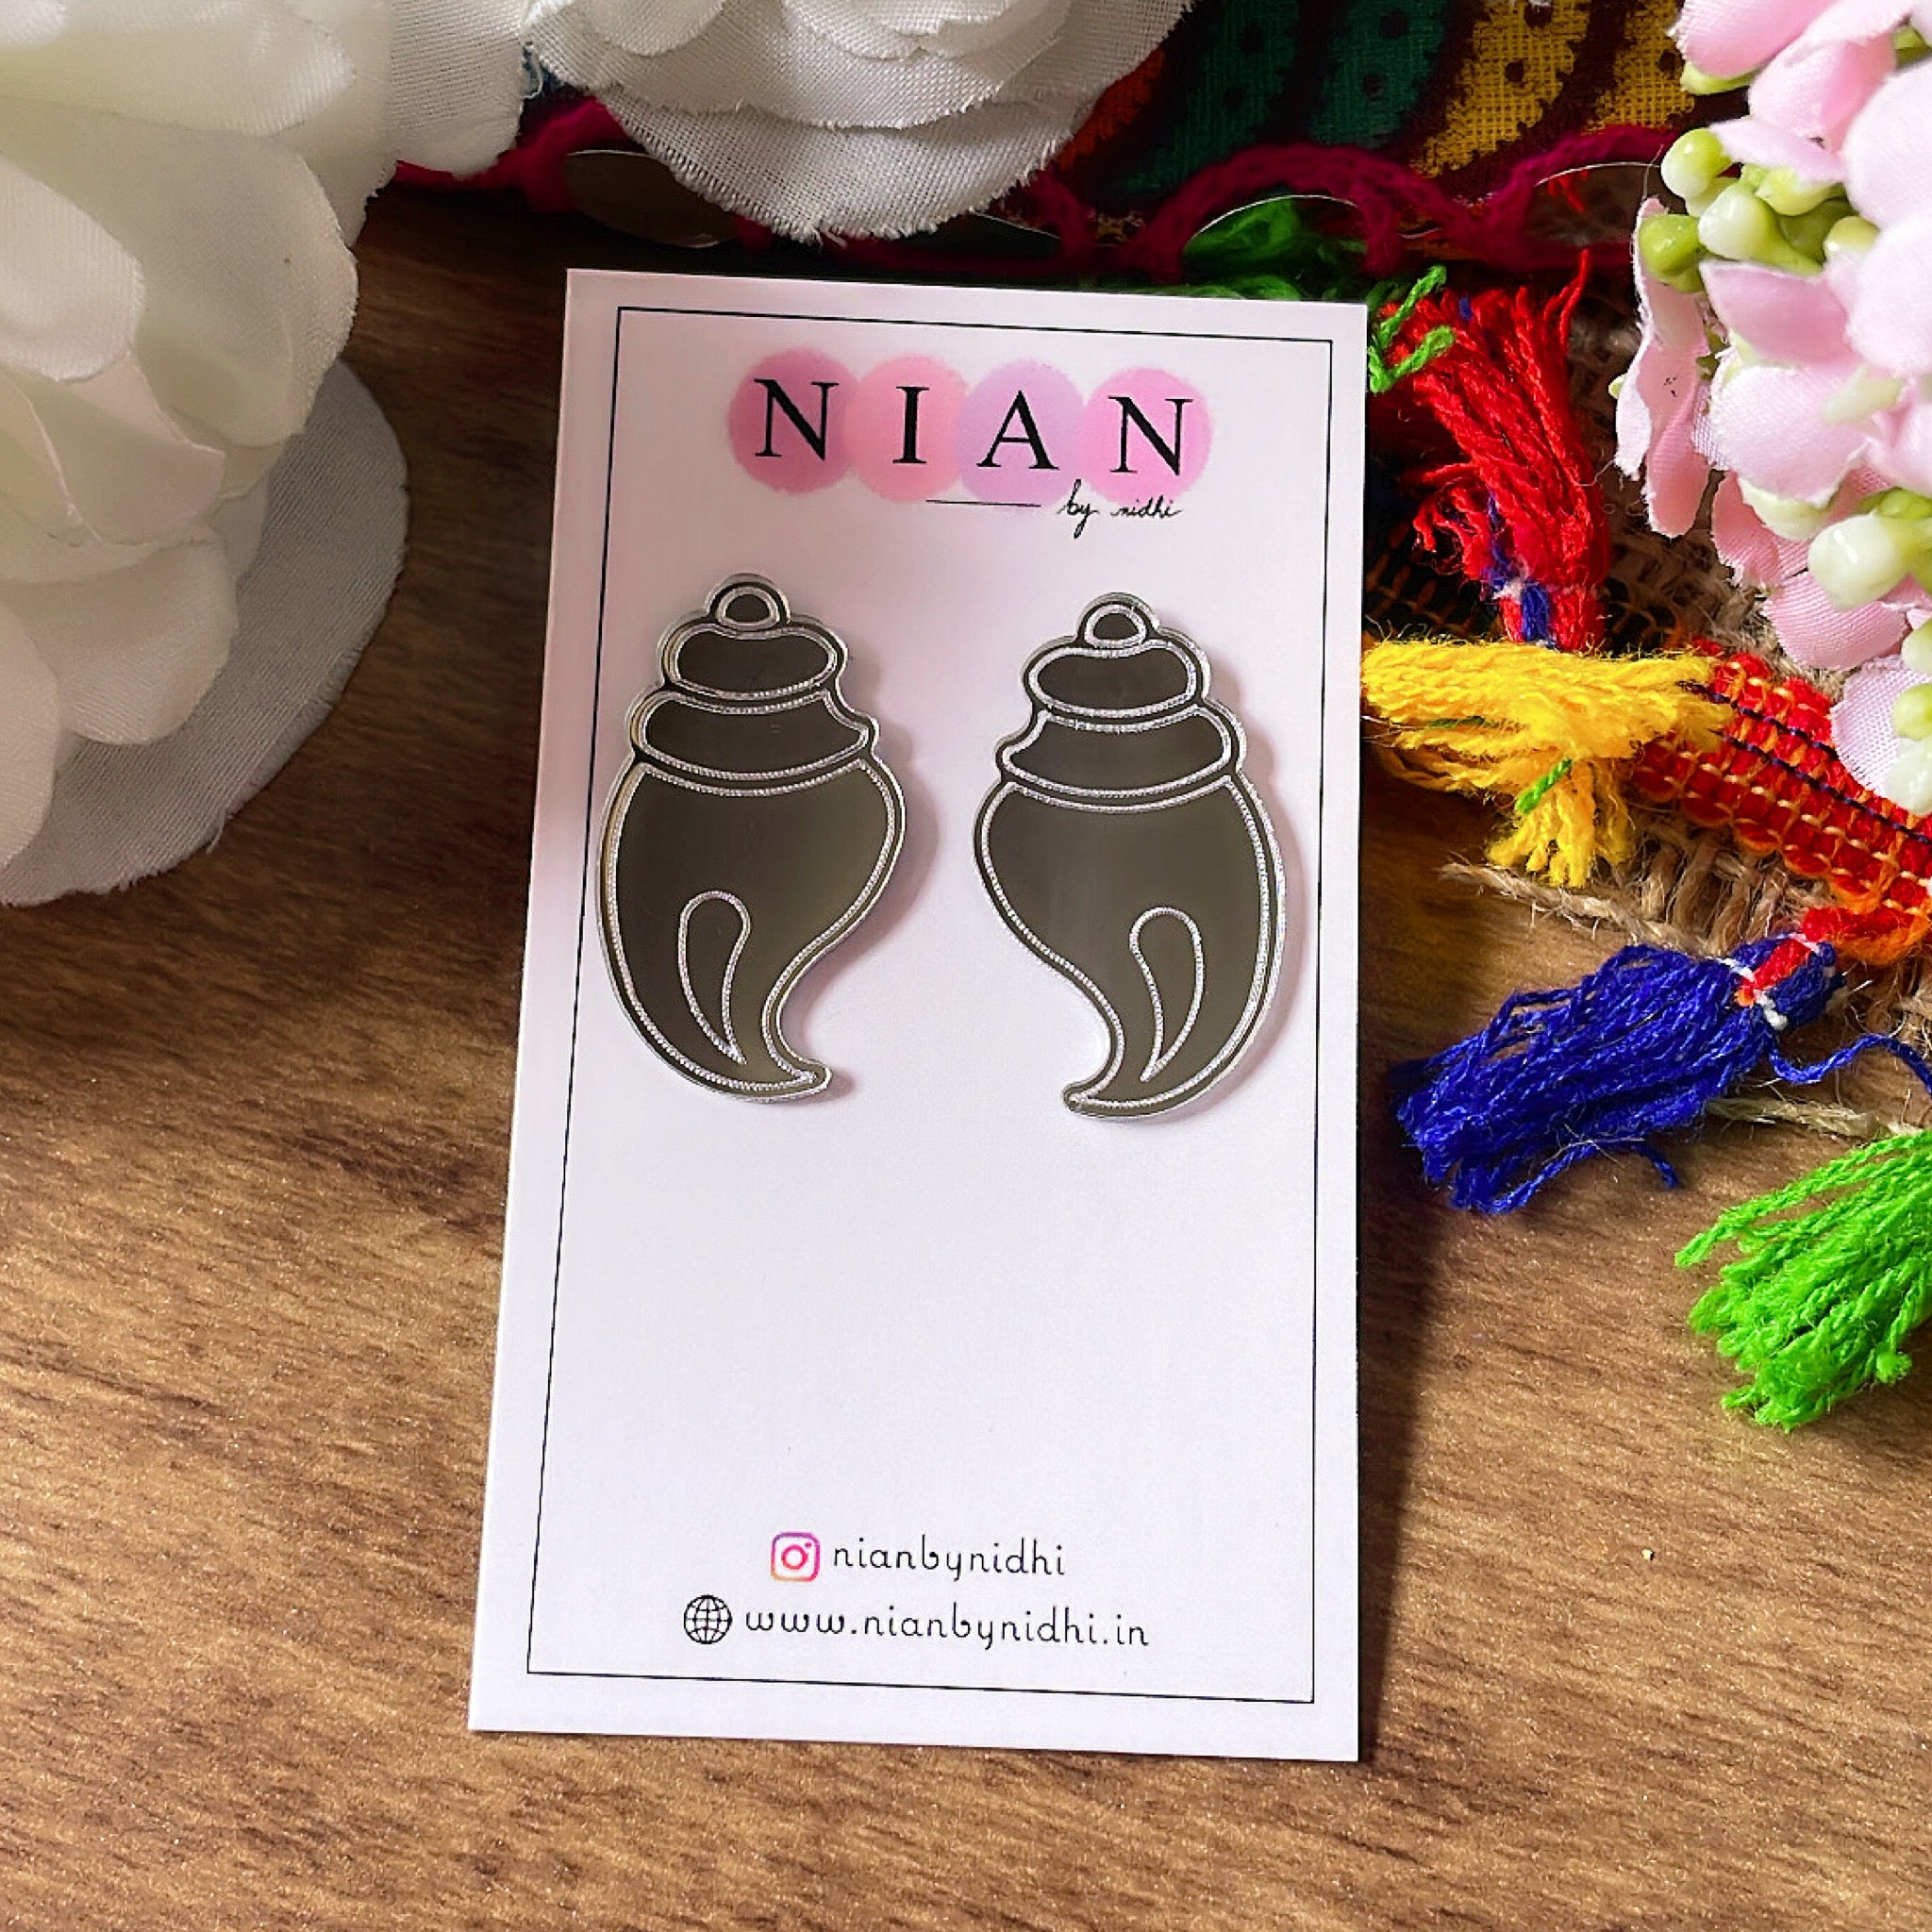 Shubh Shankh Earrings - Nian by Nidhi - Glassy Silver - placed in a brown colorful background